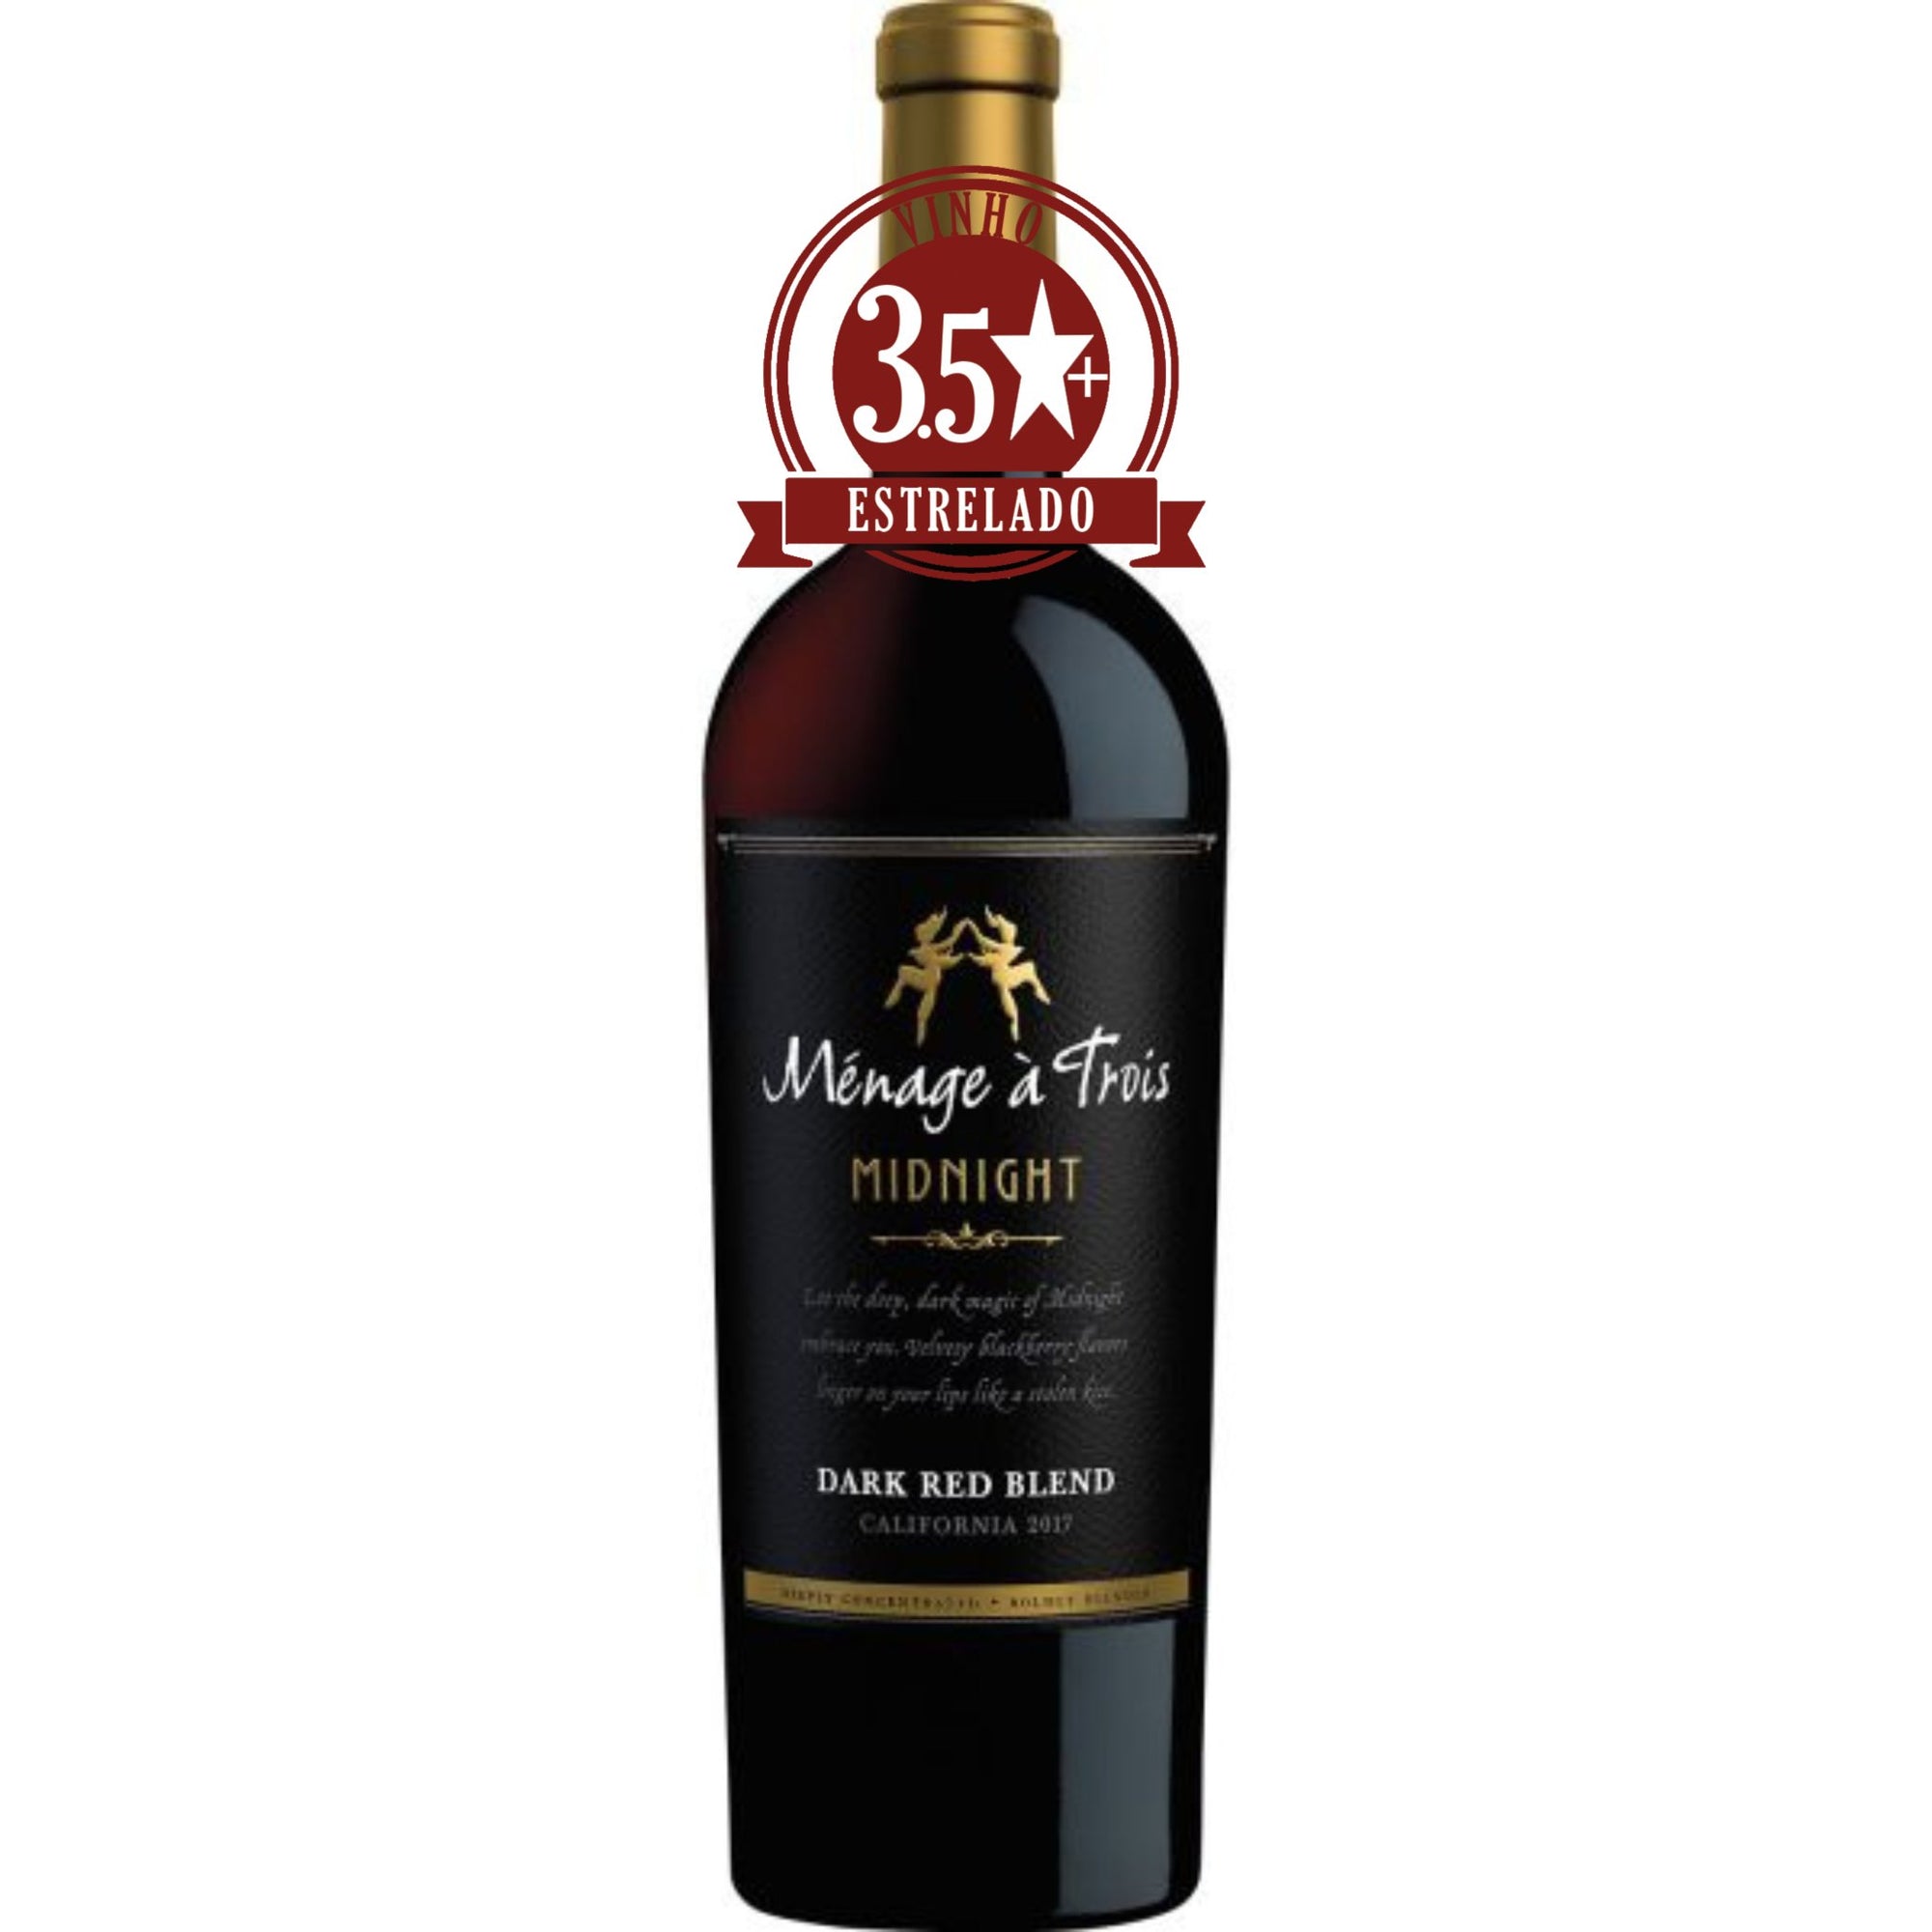 Menage a Trois Midnight Red, California 2019 - SmartBuyWines.com.br